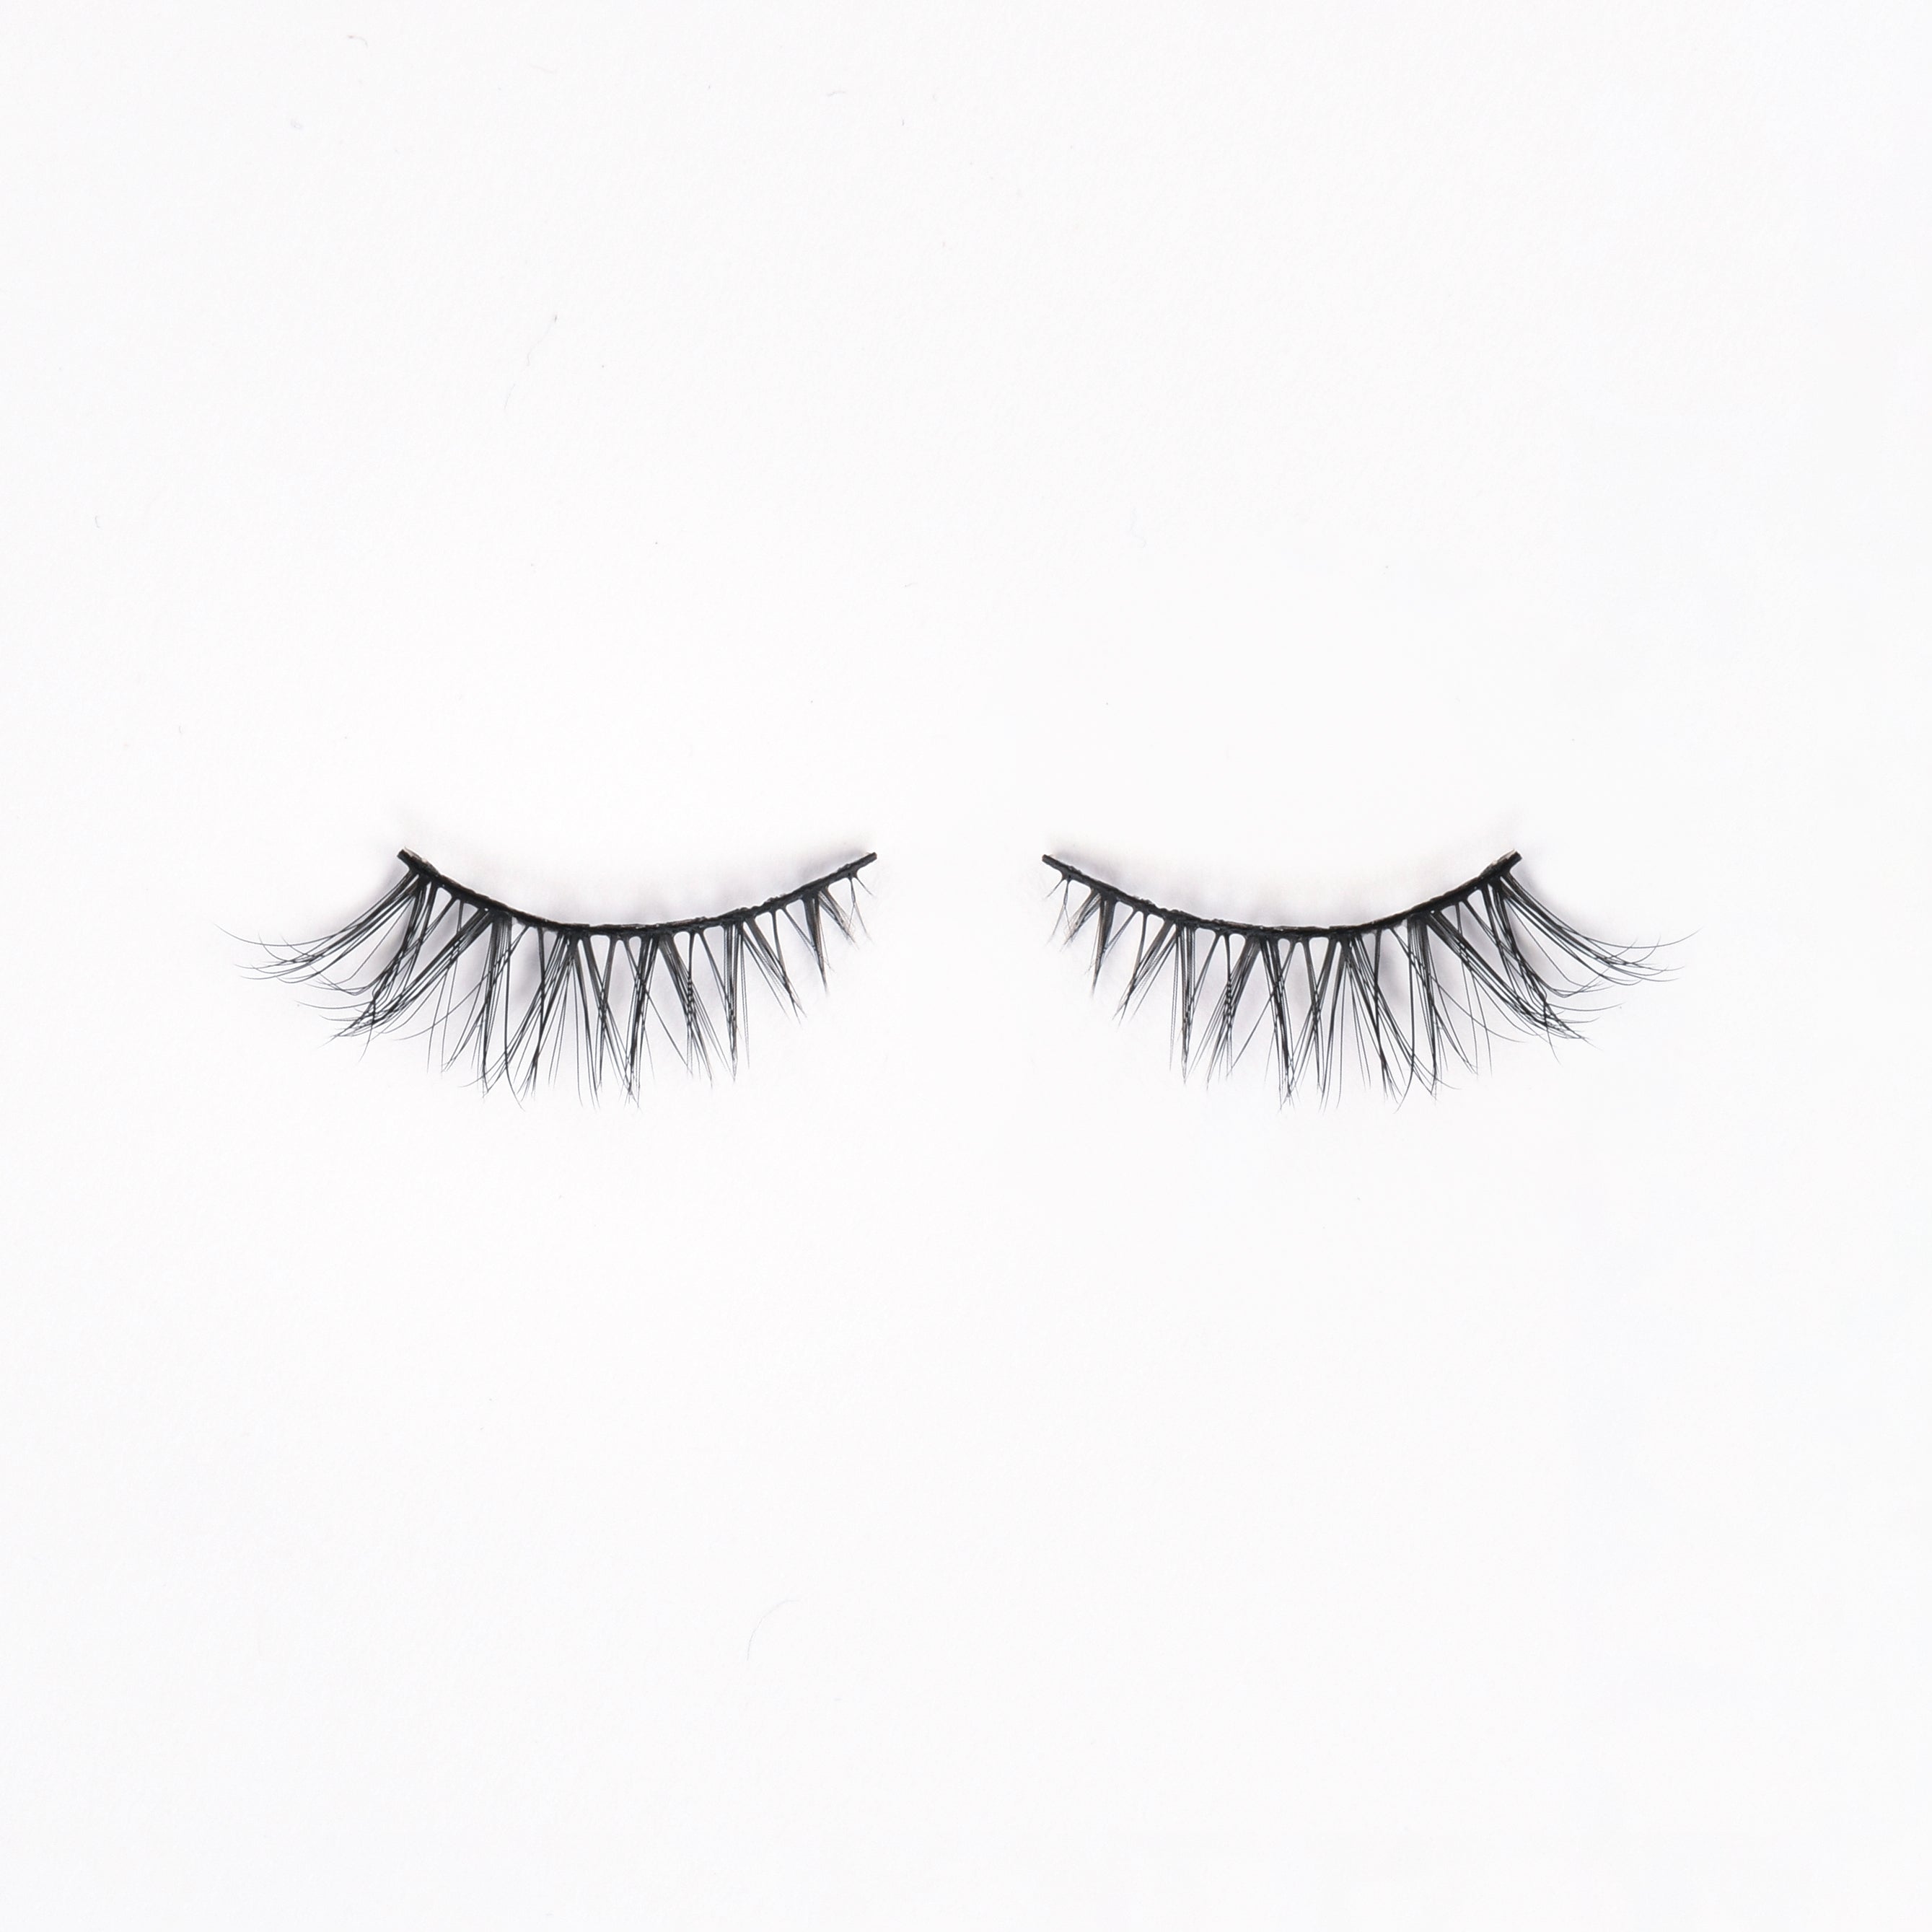 Flawless Strip Lashes: Everyday